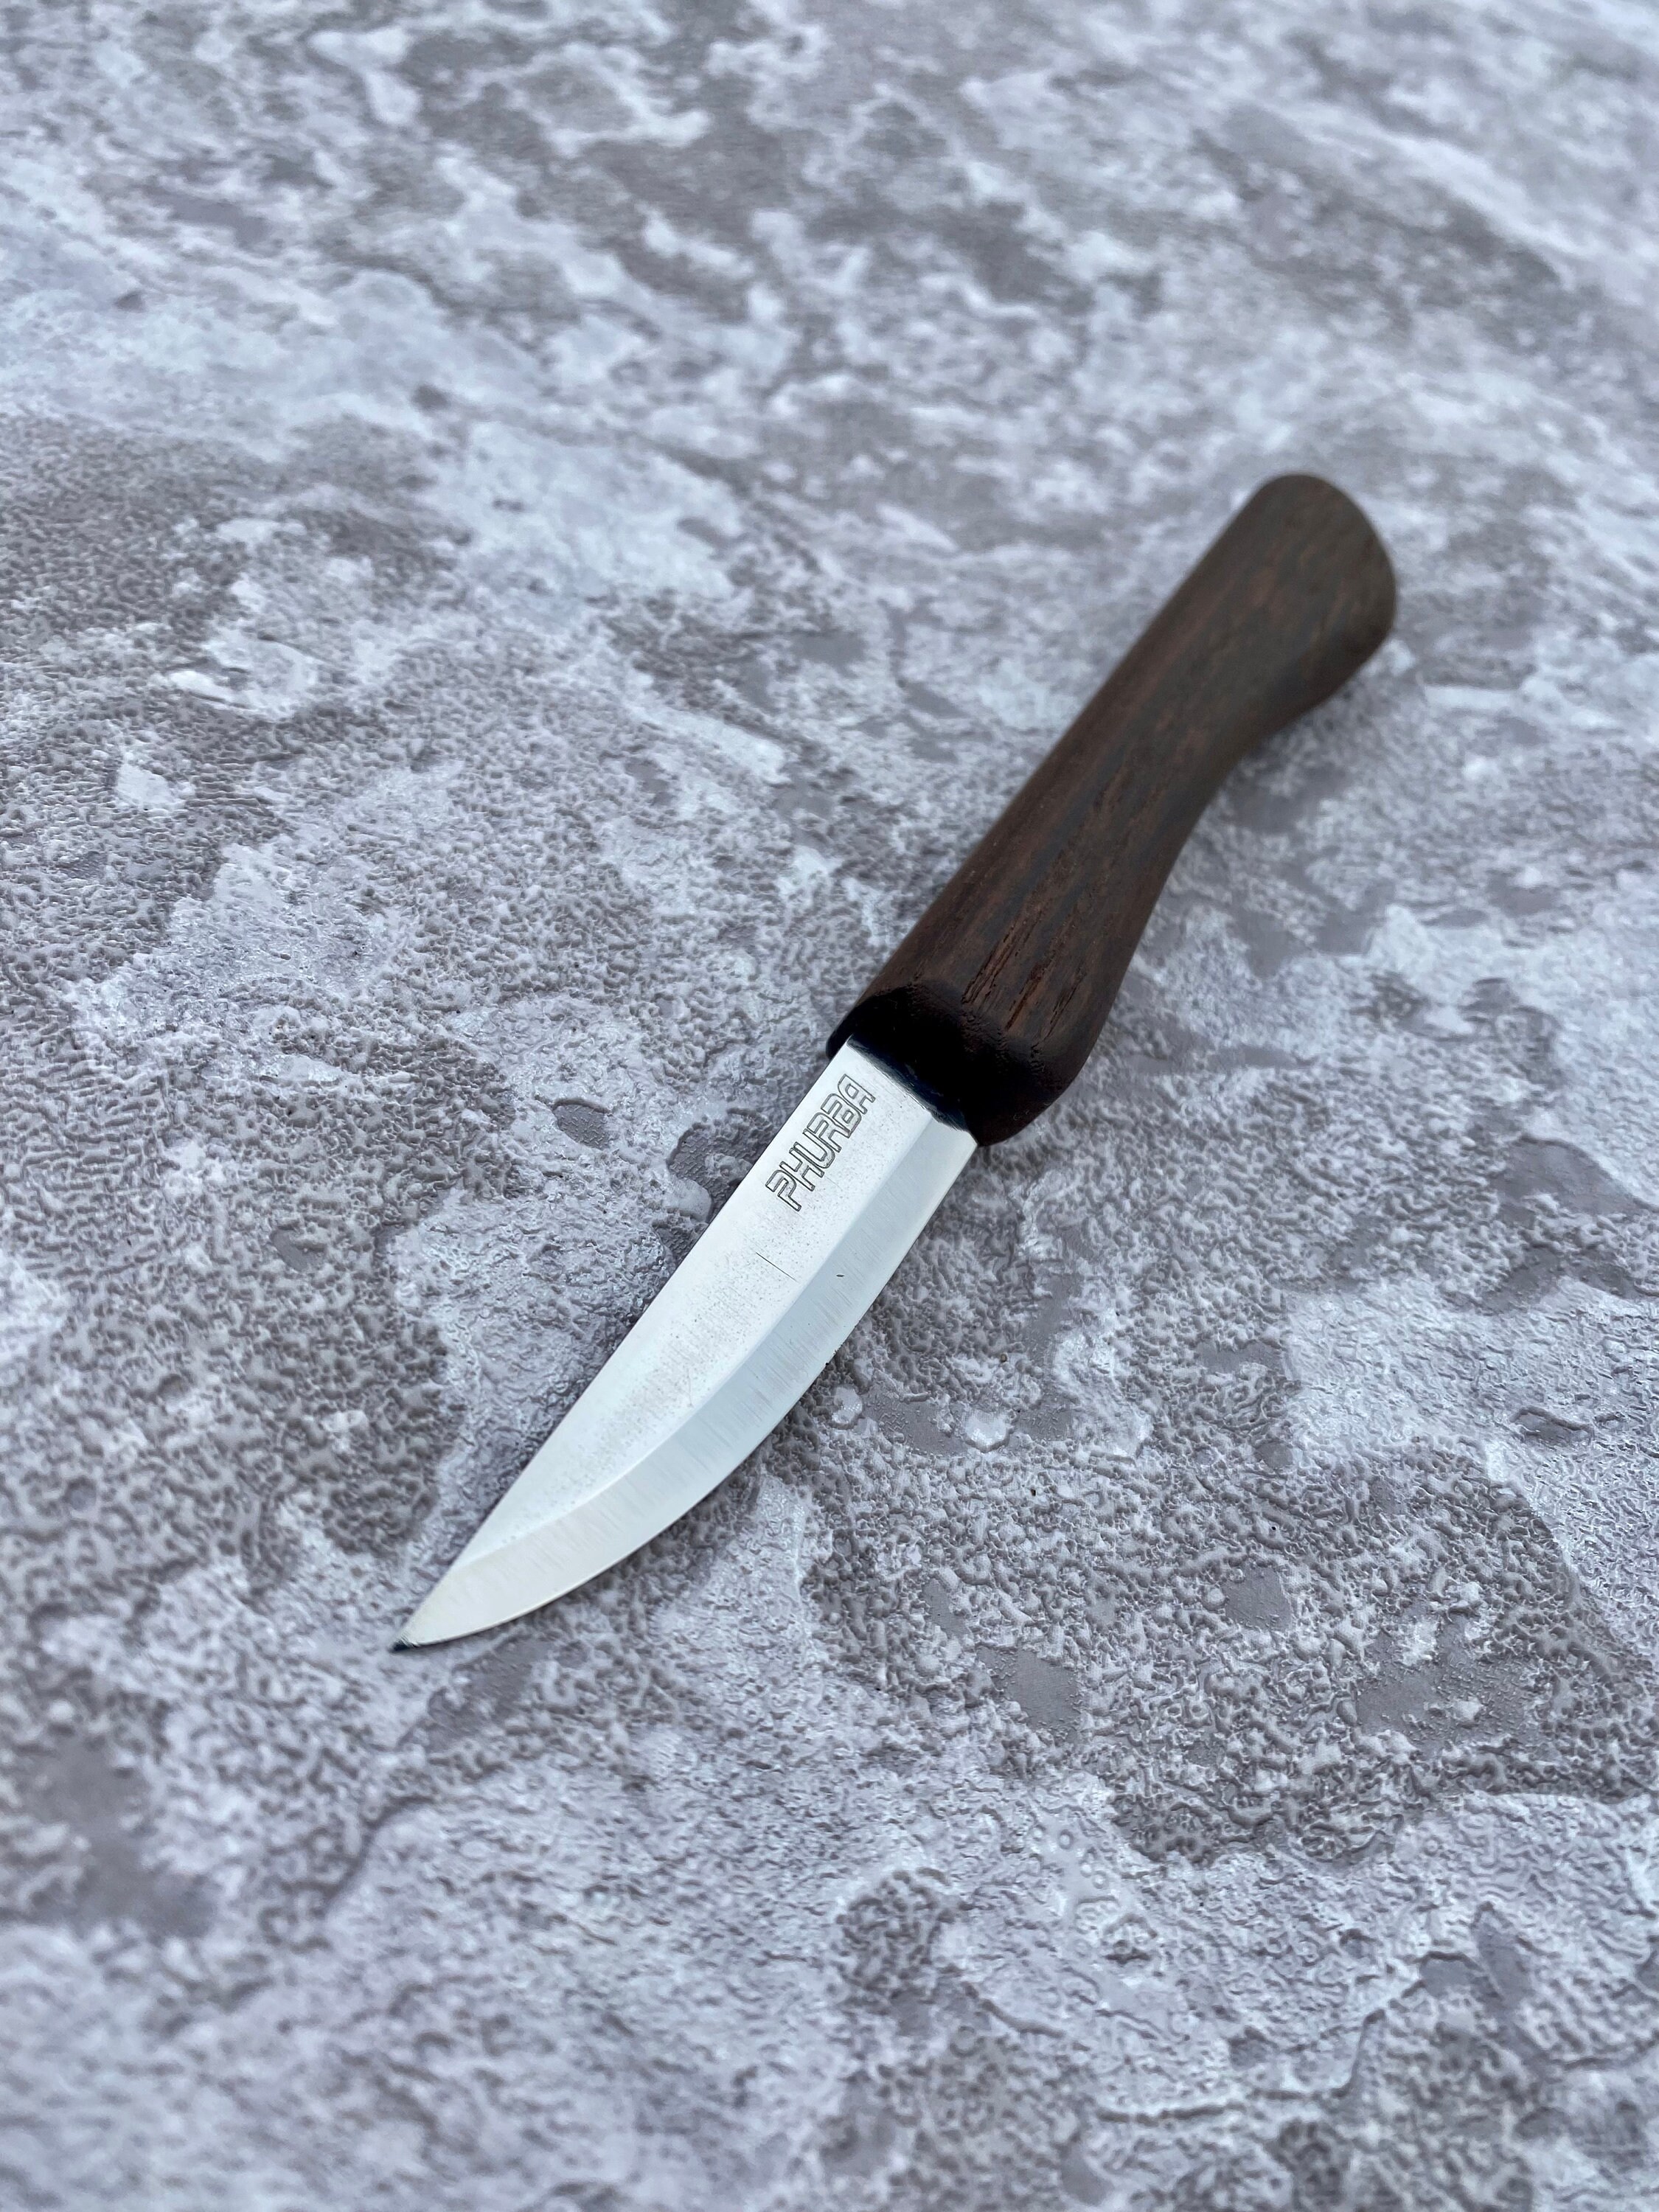 Sloyd Knife 80mm Curved Blade, Wood Carving Knife, Spoon Carving Knife,  Puukko Knife, Kuksa Knife, Carving Tool 